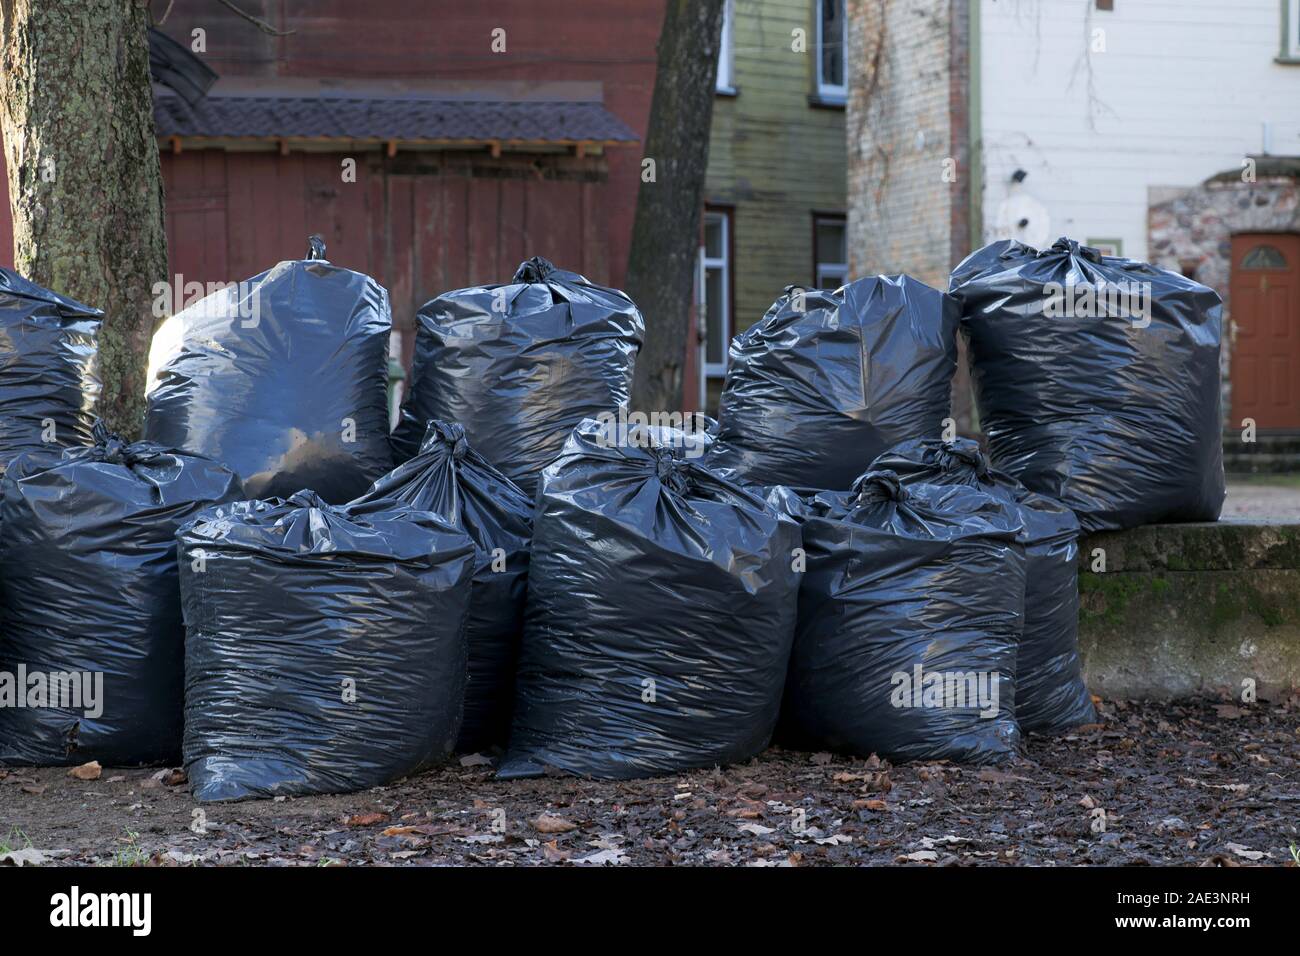 https://c8.alamy.com/comp/2AE3NRH/big-pile-of-black-plastic-garbage-bags-with-trash-stacked-on-the-street-trash-bags-on-the-street-at-utility-workers-strike-day-2AE3NRH.jpg